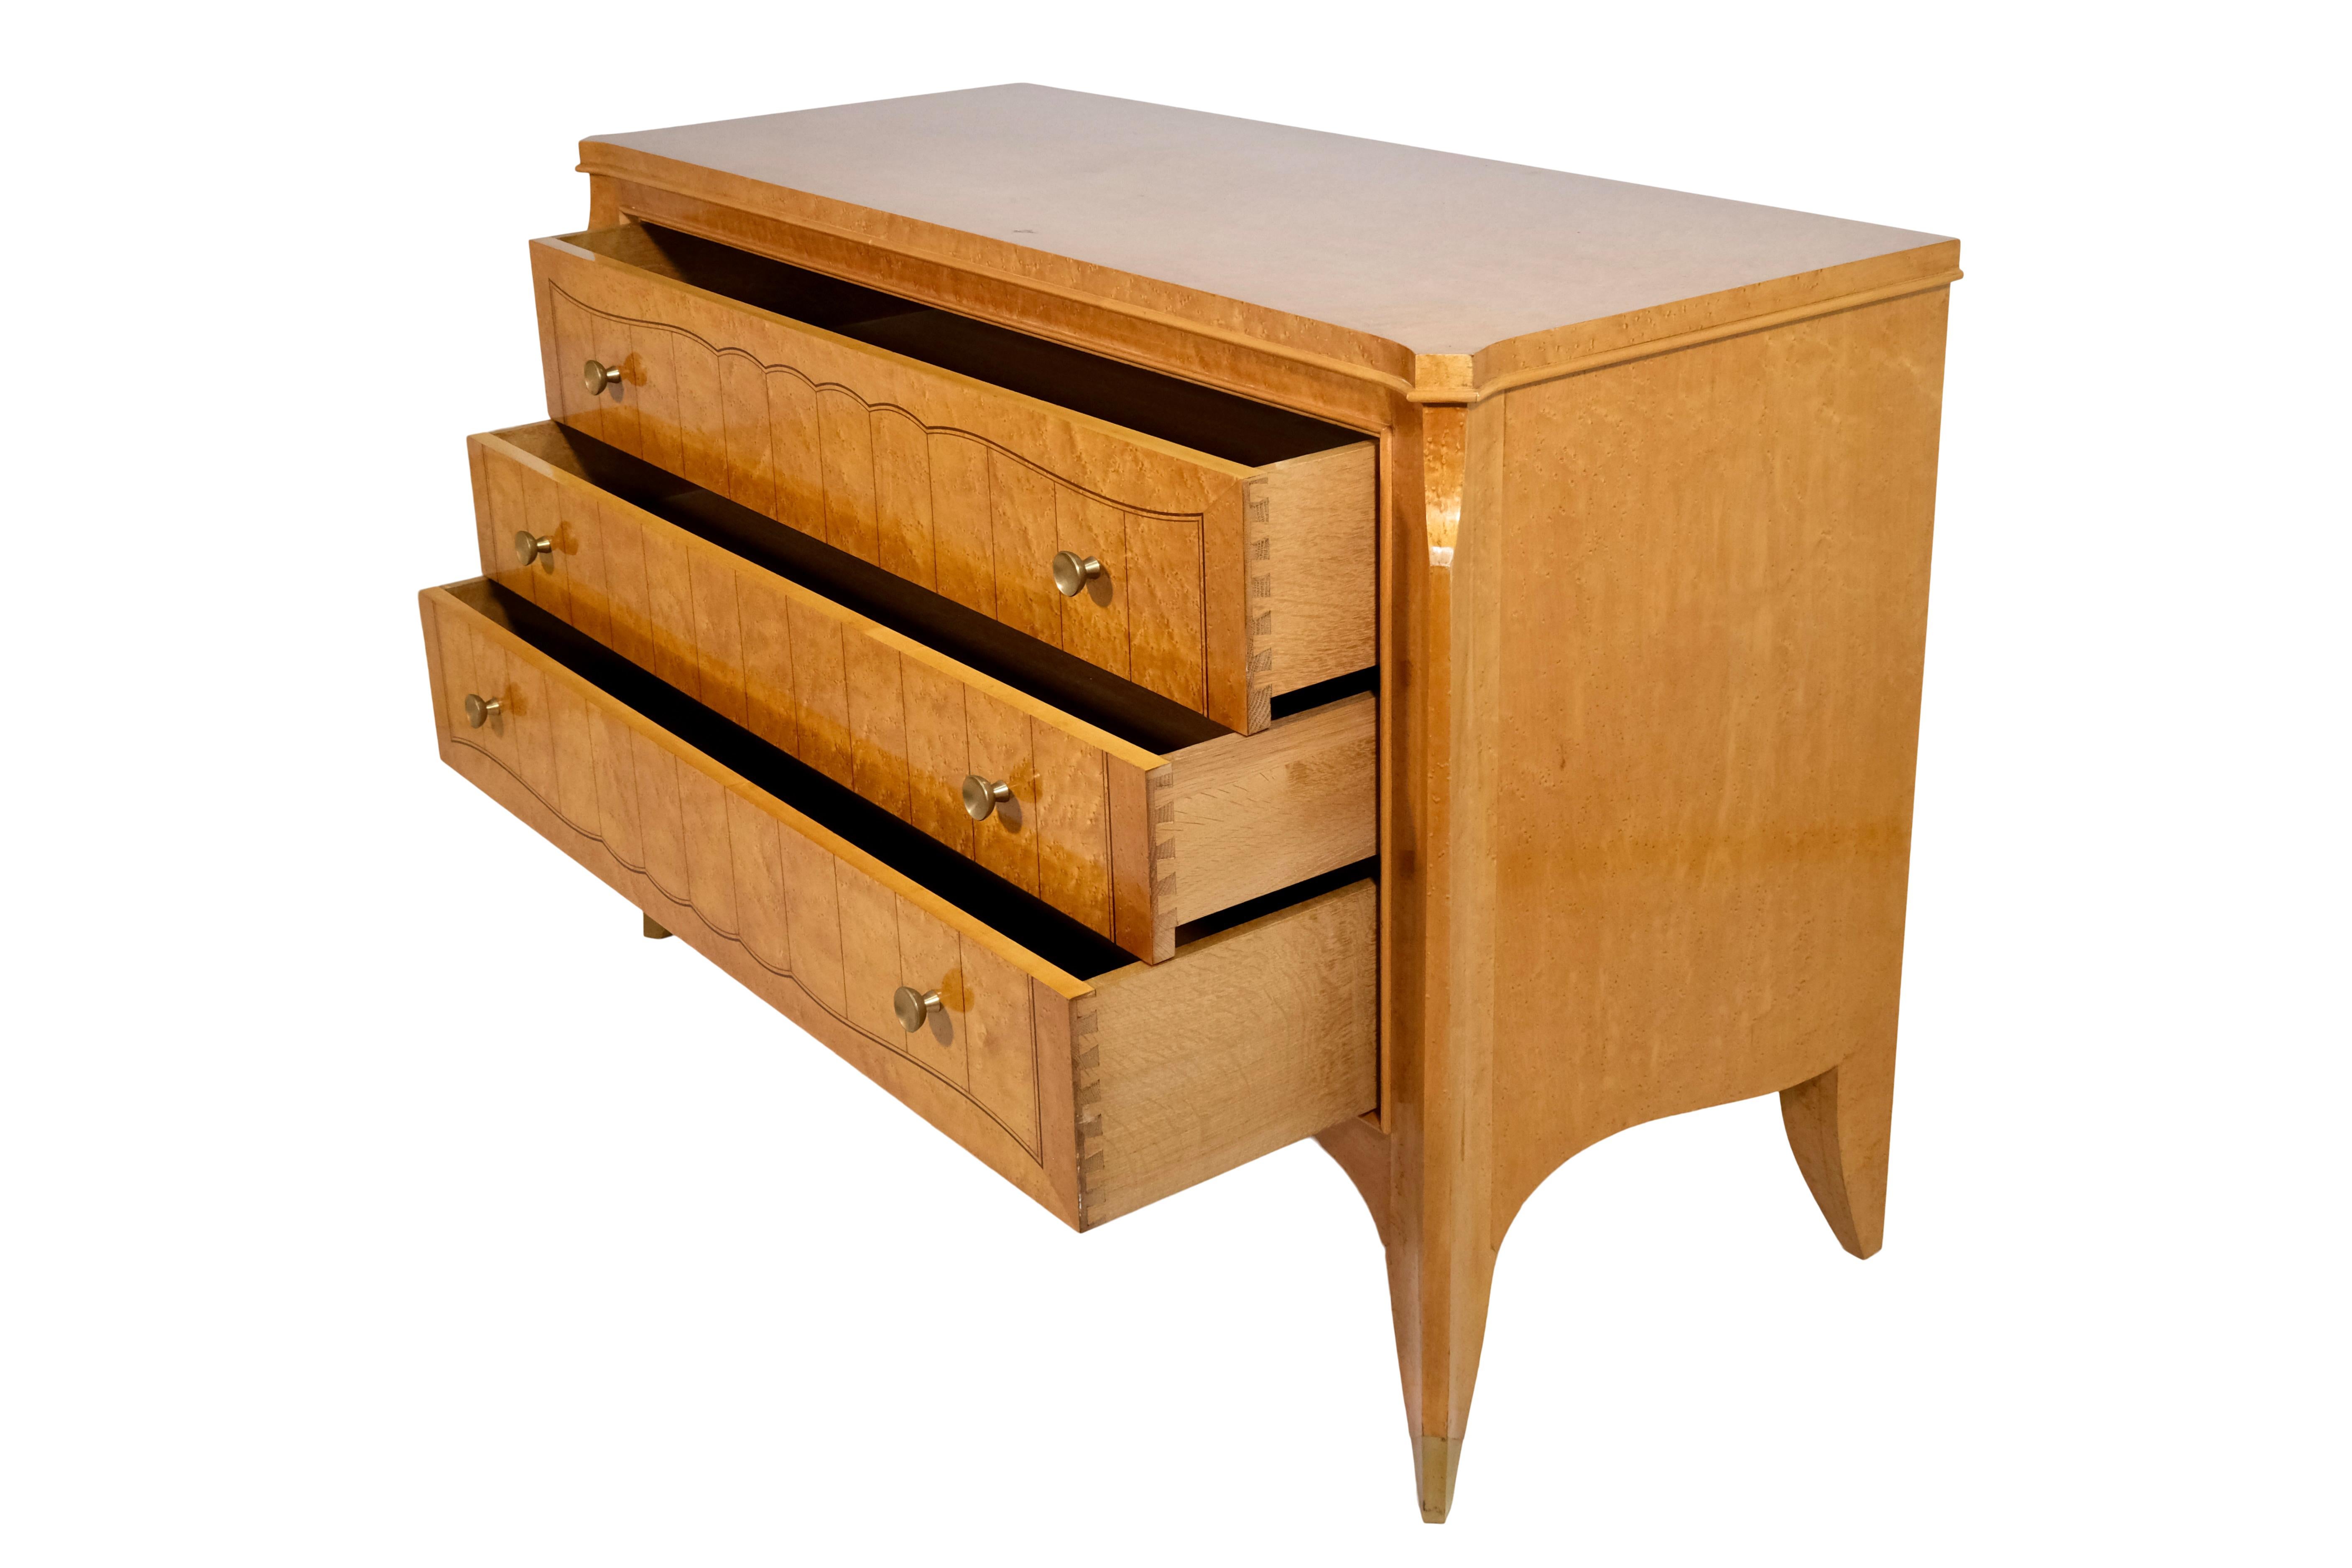 French 1930s Jean Pascaud Art Deco Chest Of Drawers in Birdseye Maple In Good Condition For Sale In Ulm, DE